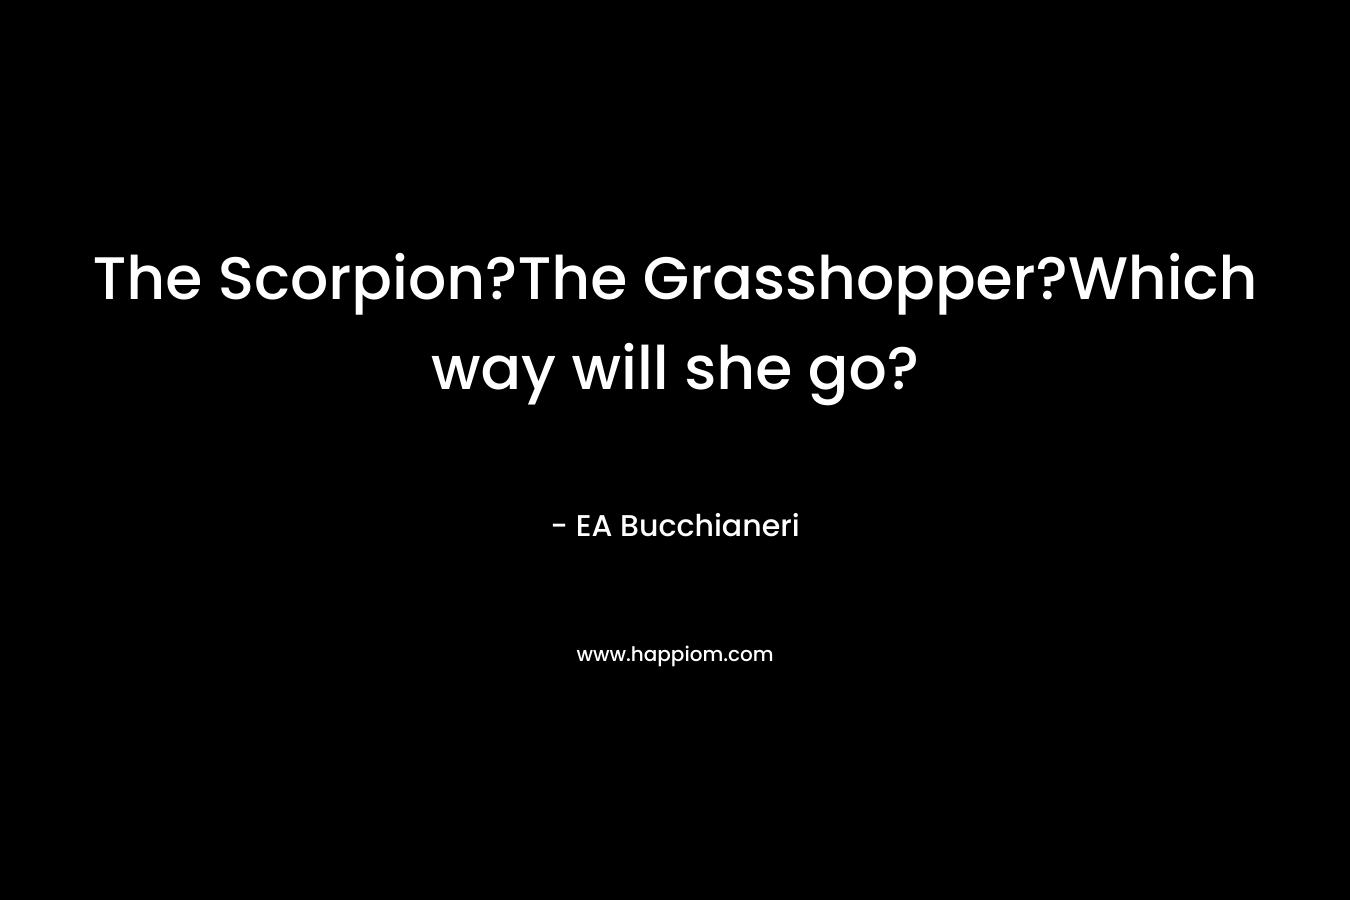 The Scorpion?The Grasshopper?Which way will she go?